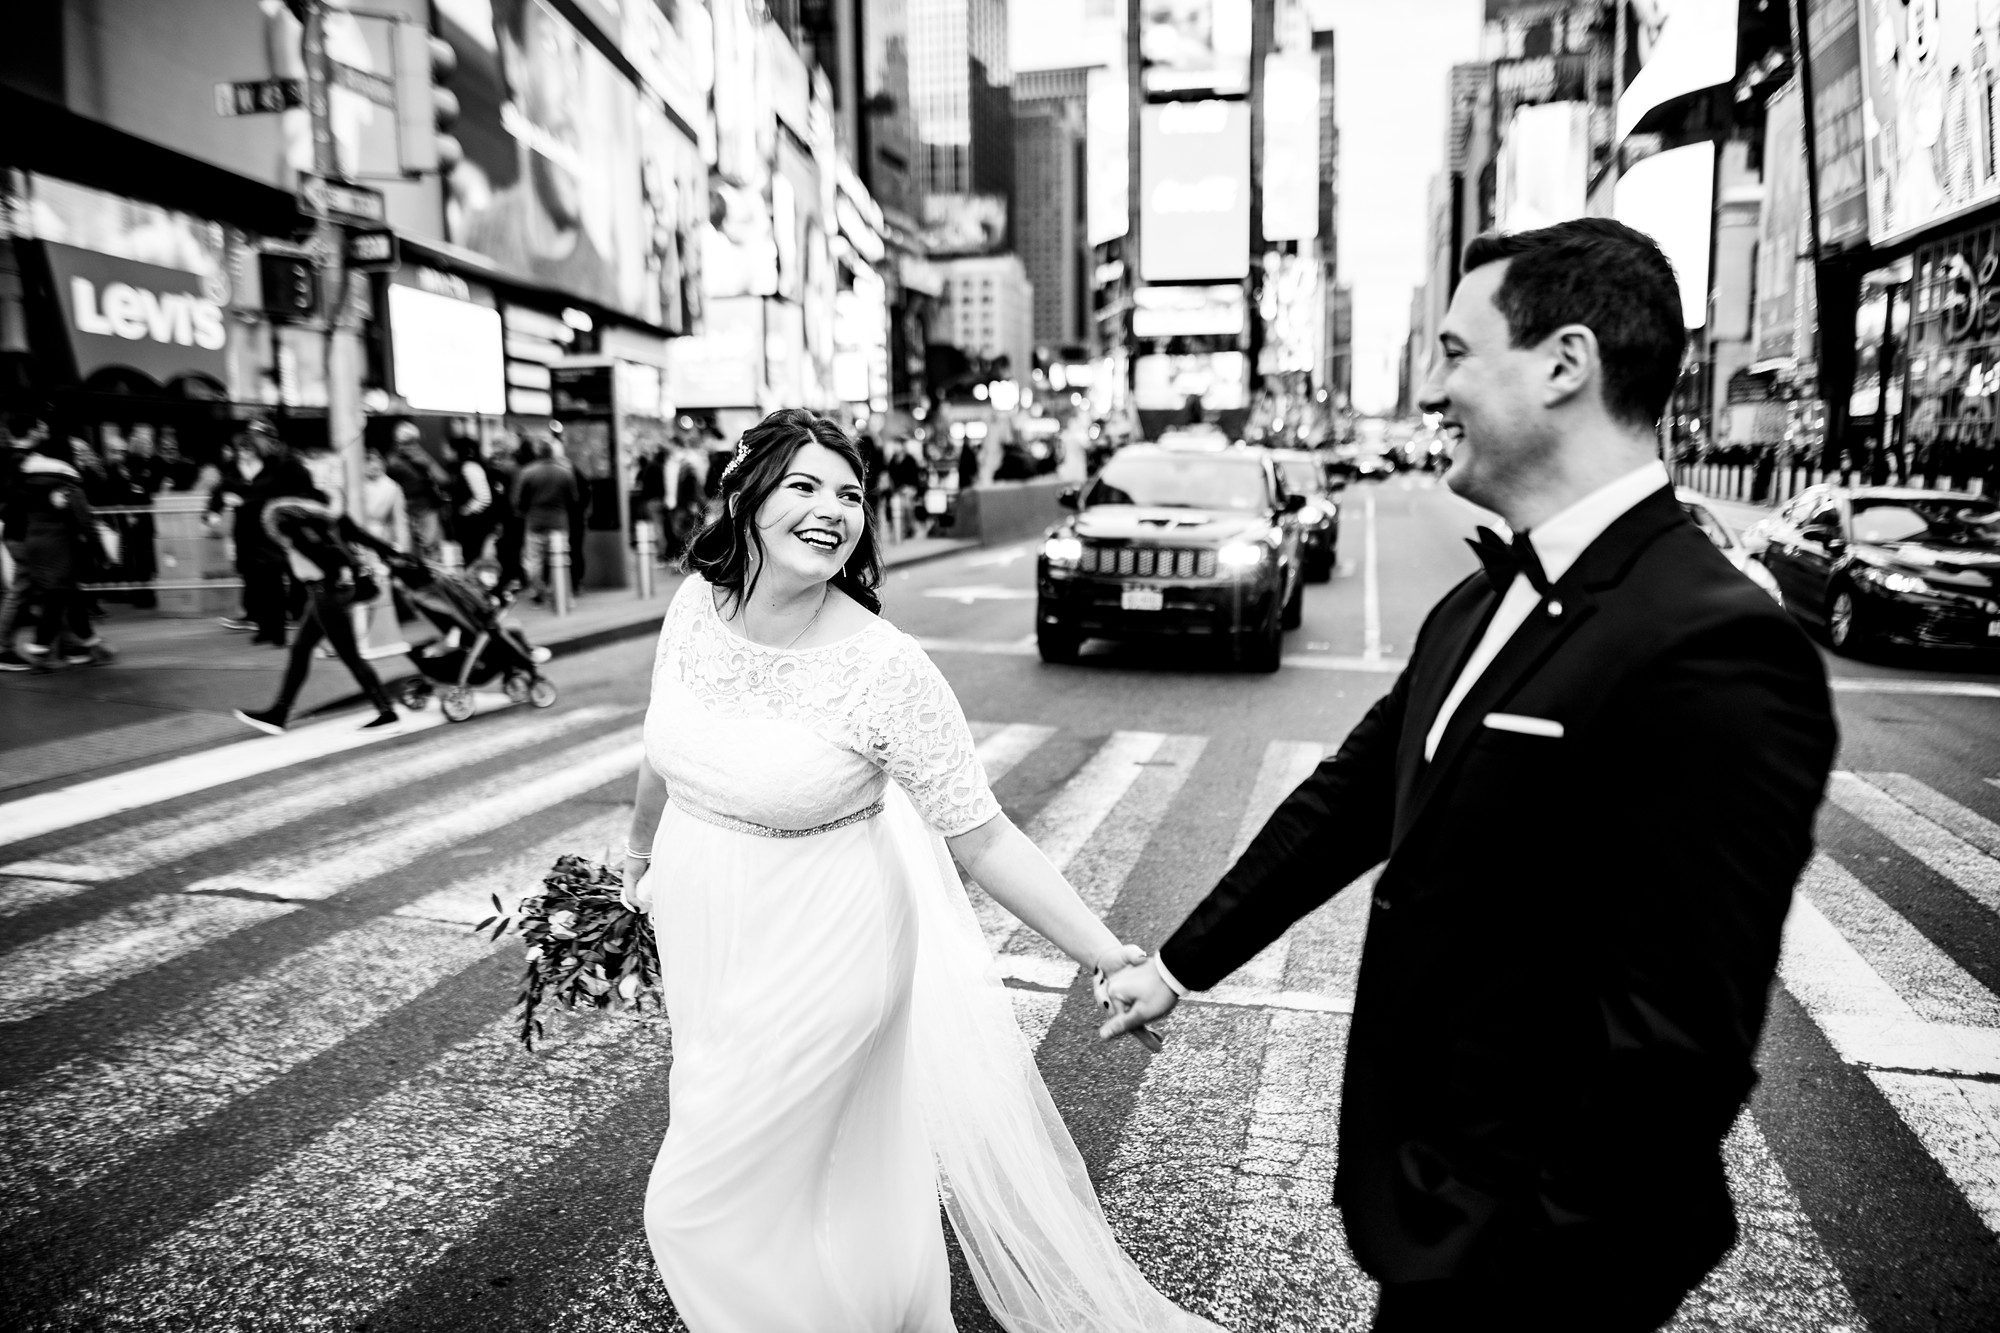 Most popular places for wedding photos in new york